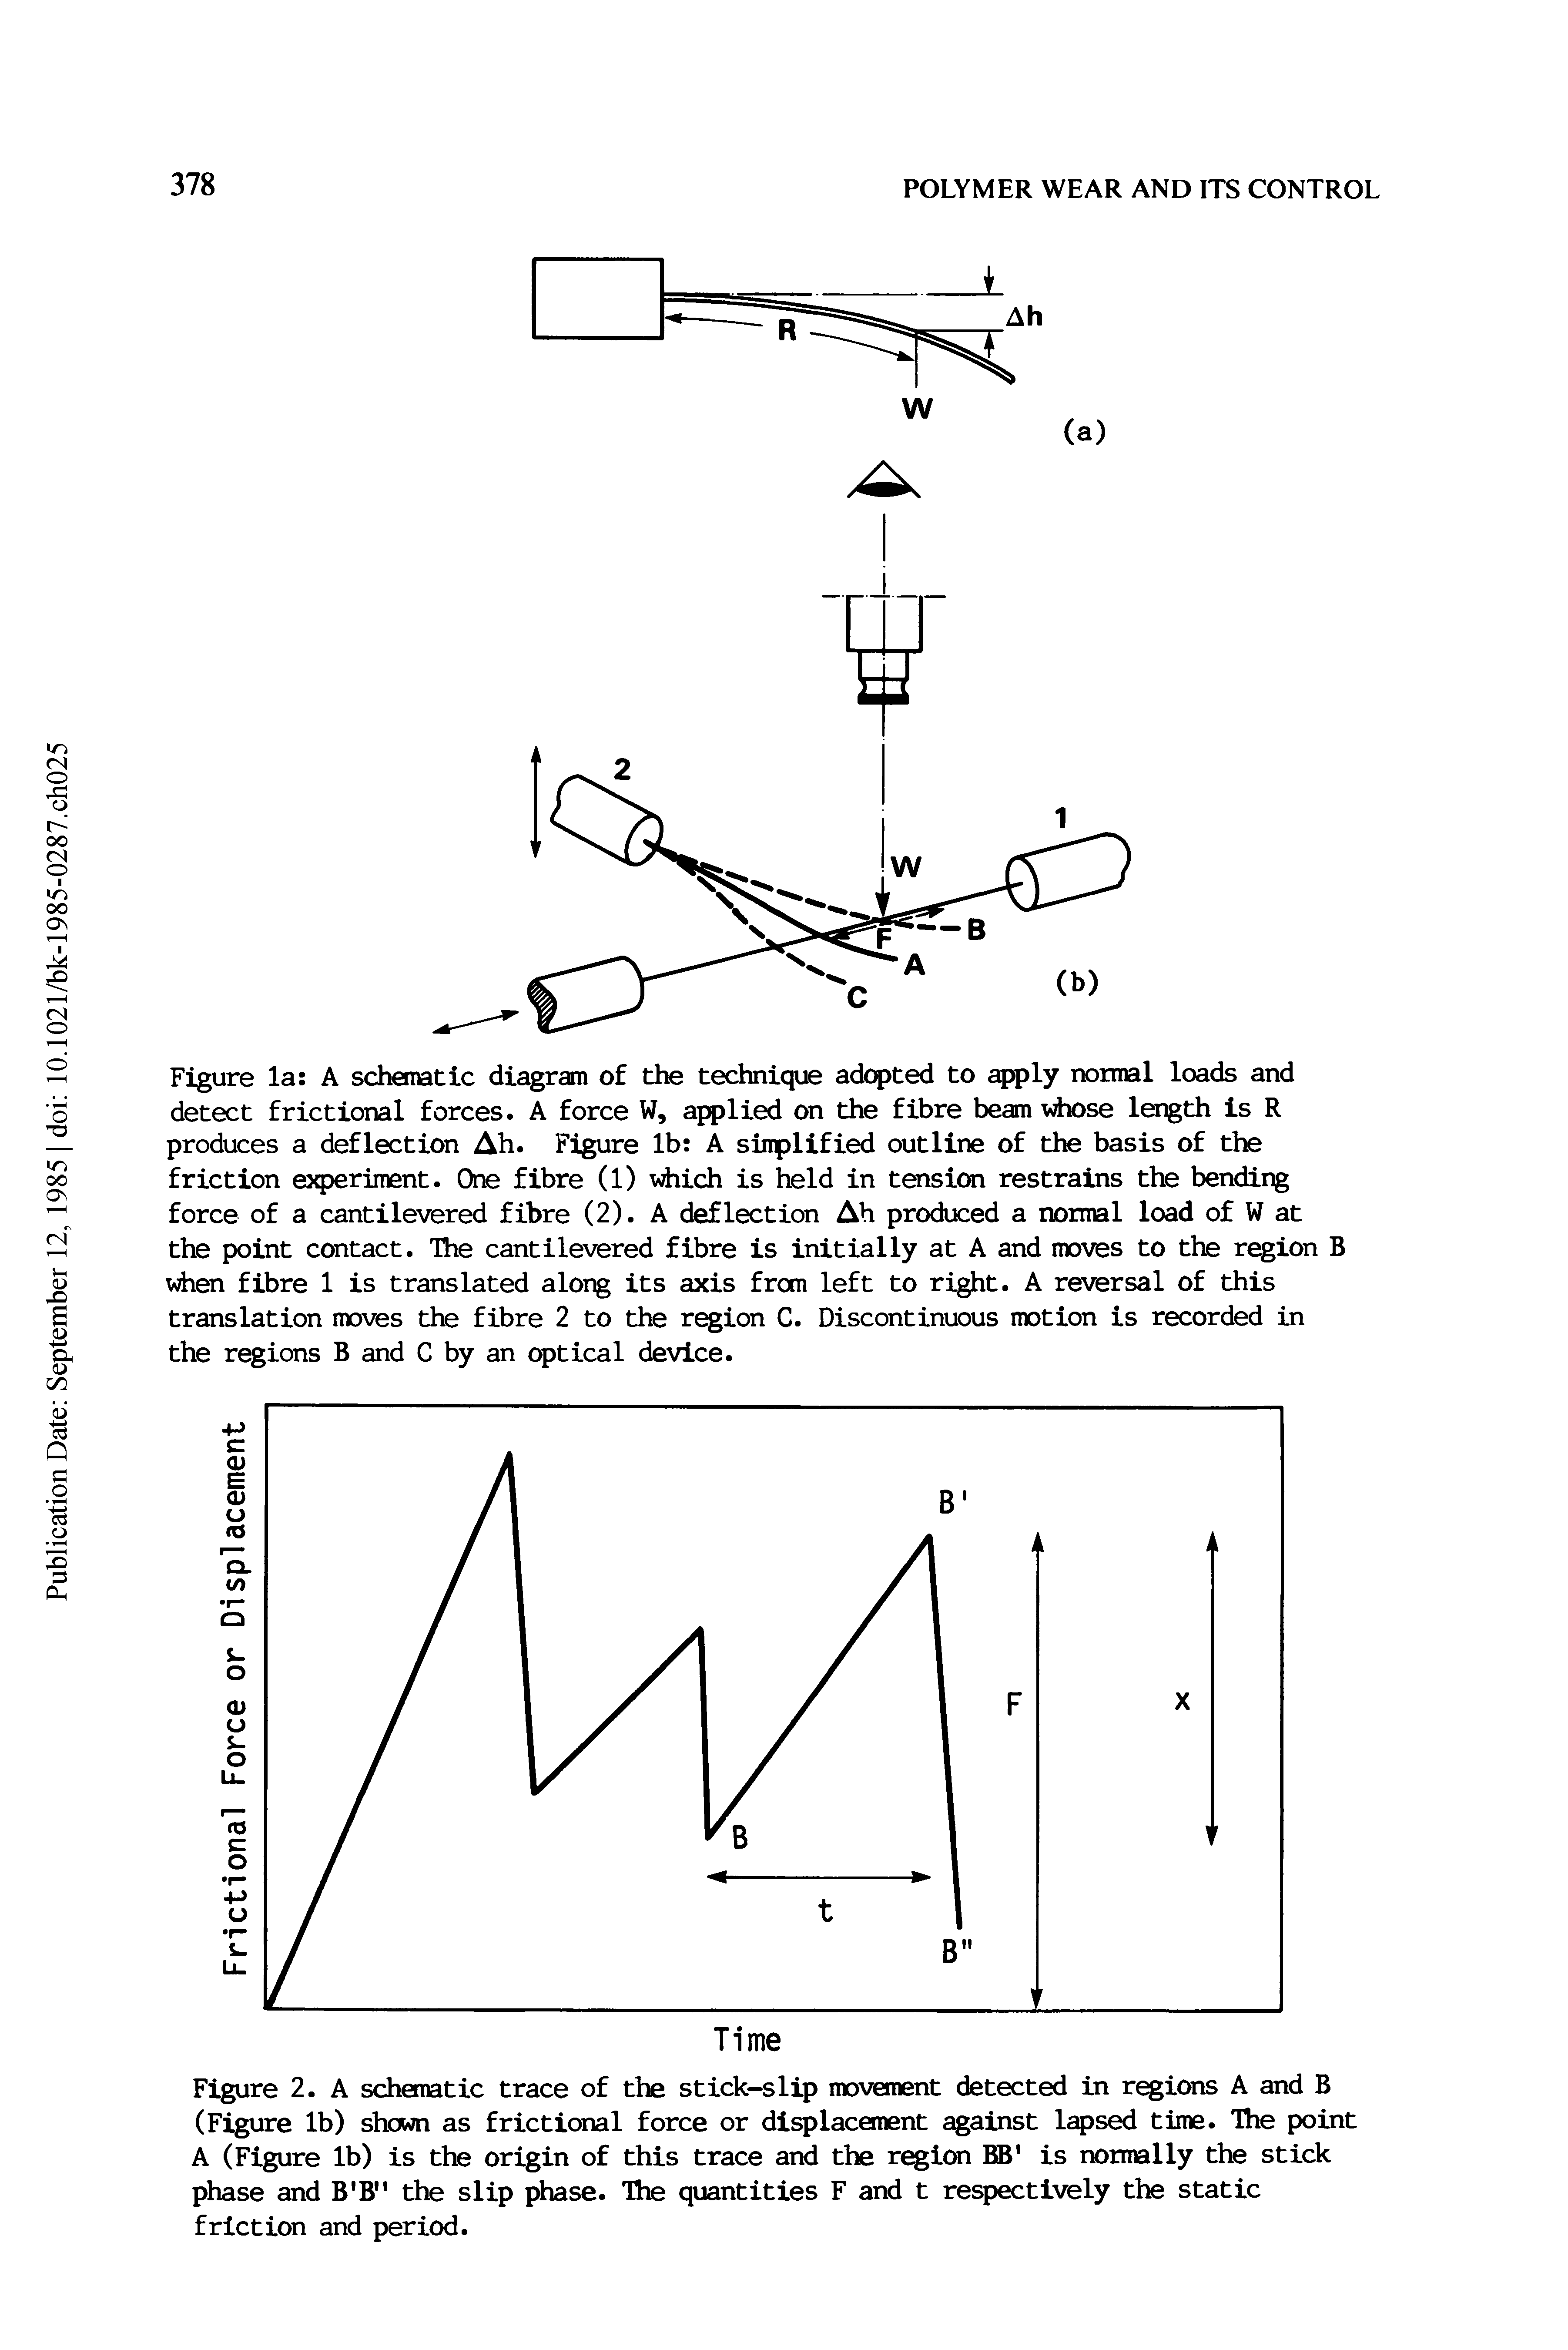 Figure 2. A schanatic trace of the stick-slip movement detected in regions A and B (Figure lb) shewn as frictional force or displacement against lapsed time. The point A (Figure lb) is the origin of this trace and the region BB is normally the stick phase and B B" the slip phase. The quantities F and t respectively the static friction and period.